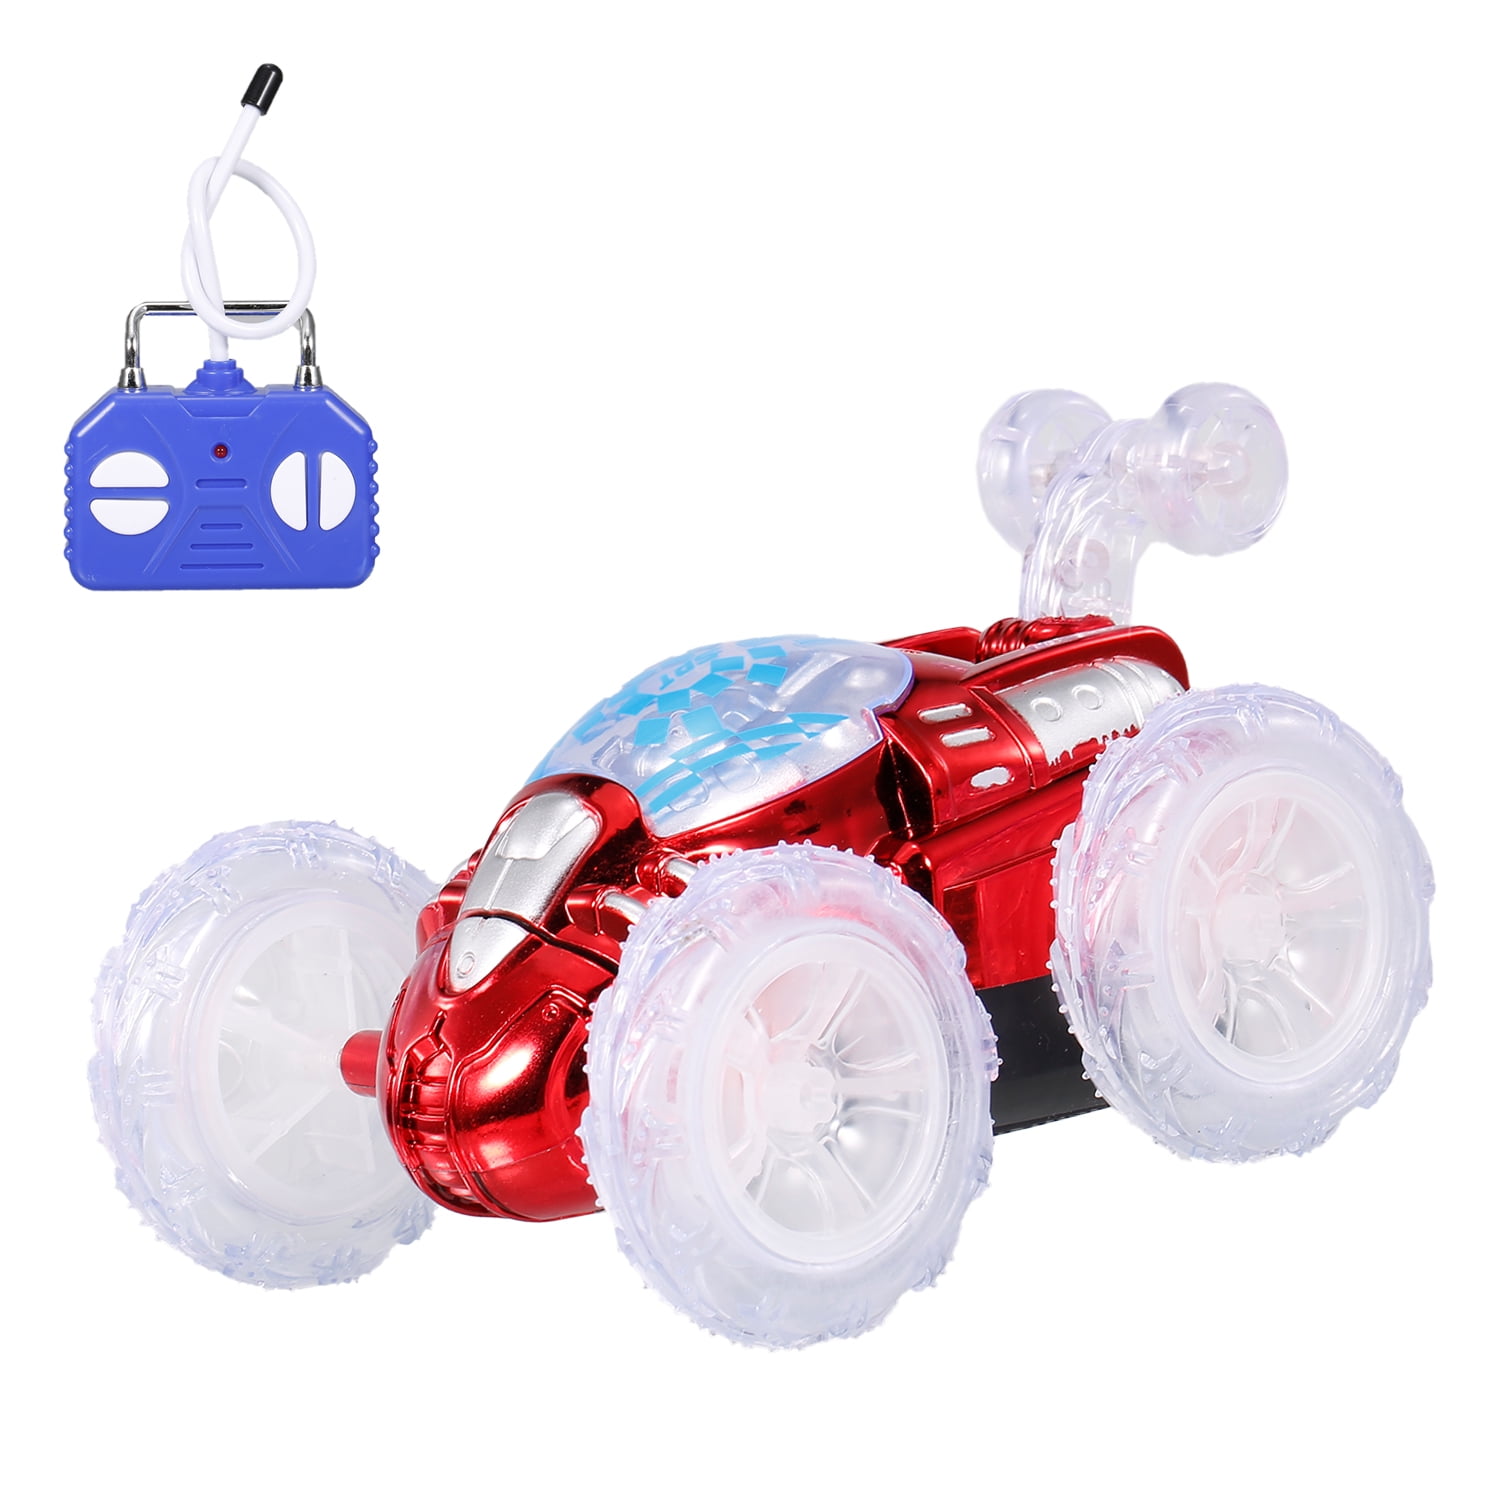 RC Dasher Stunt Kids Toy Car 40MHz Electric Big Twister Fun Gift Item for Boys 